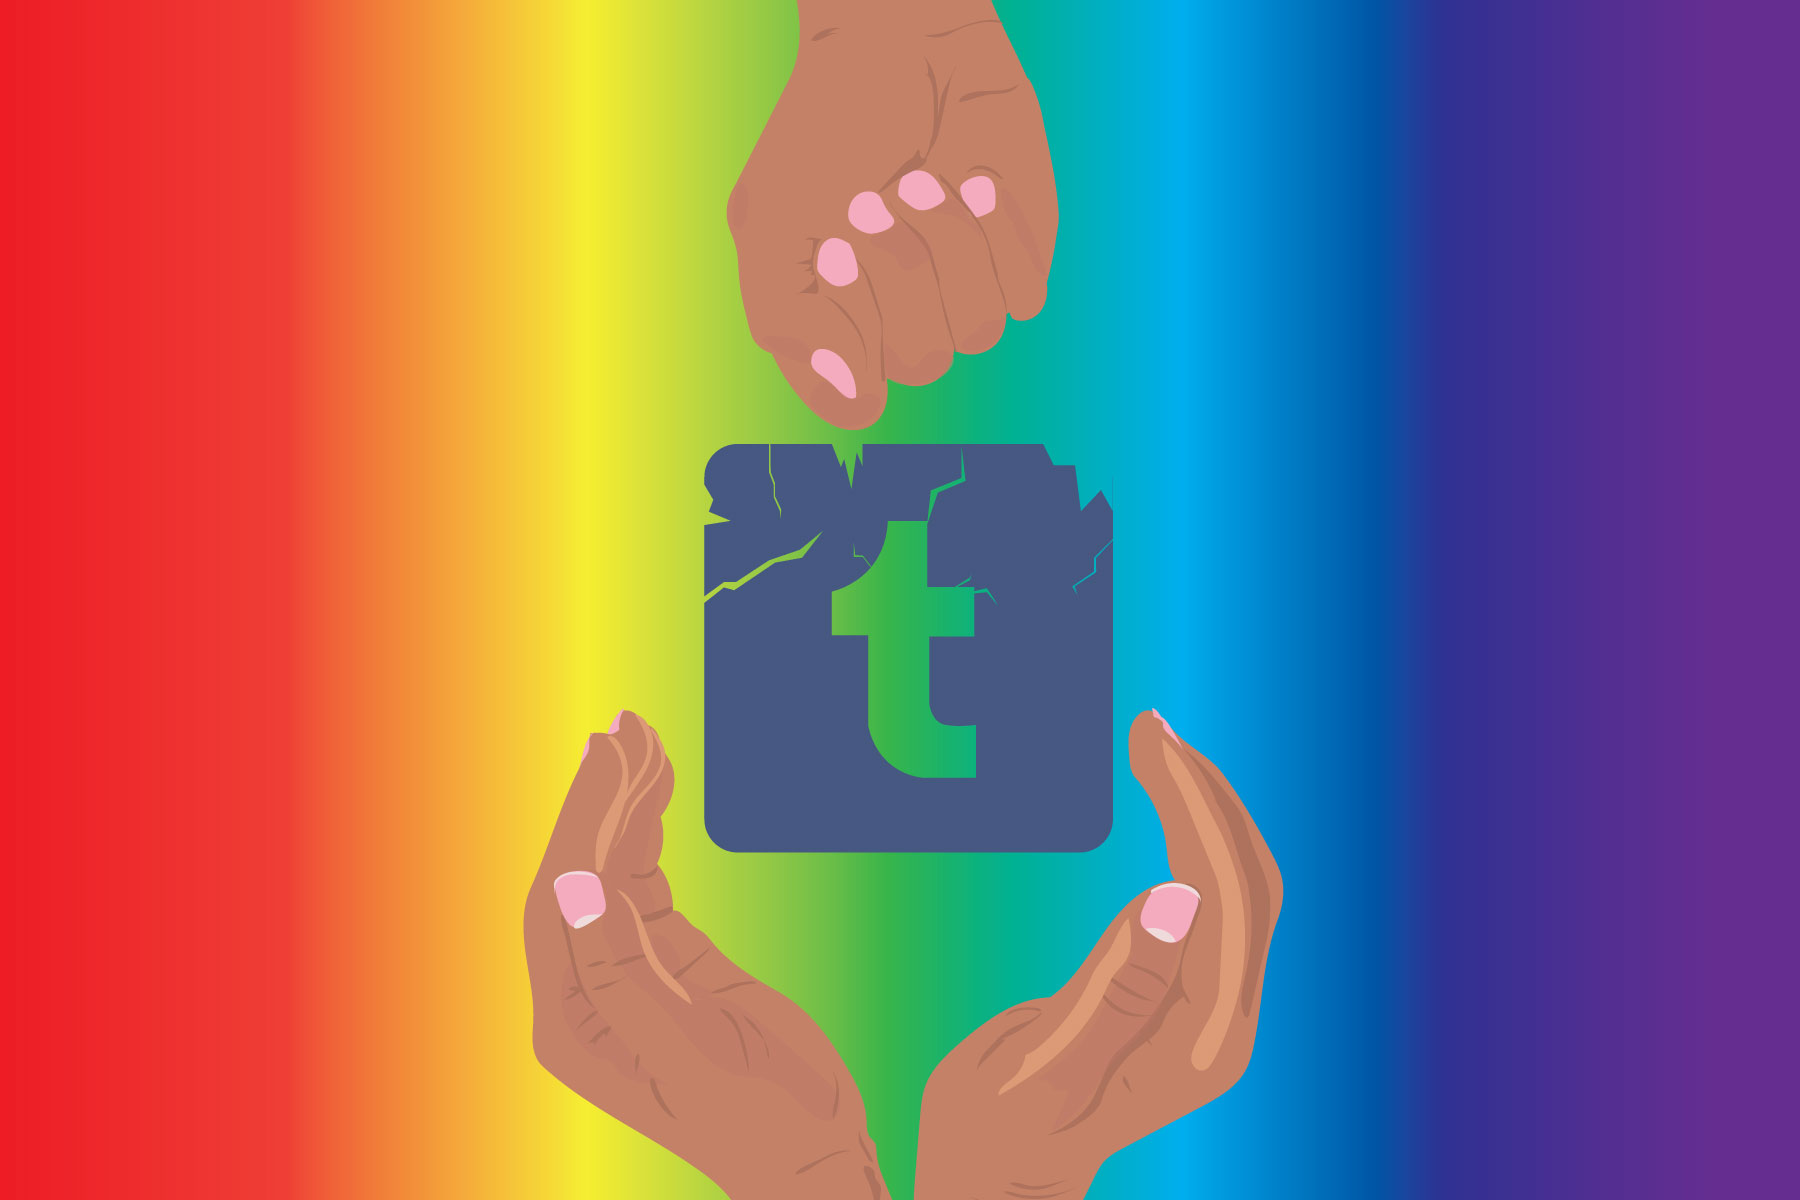 In an article discussing how Tumblr single-handledy both harmed and uplifted a community of LGBT+ individuals, the Tumblr icon is seen displayed against a rainbow back drop with open palms below it and a fist above the icon.